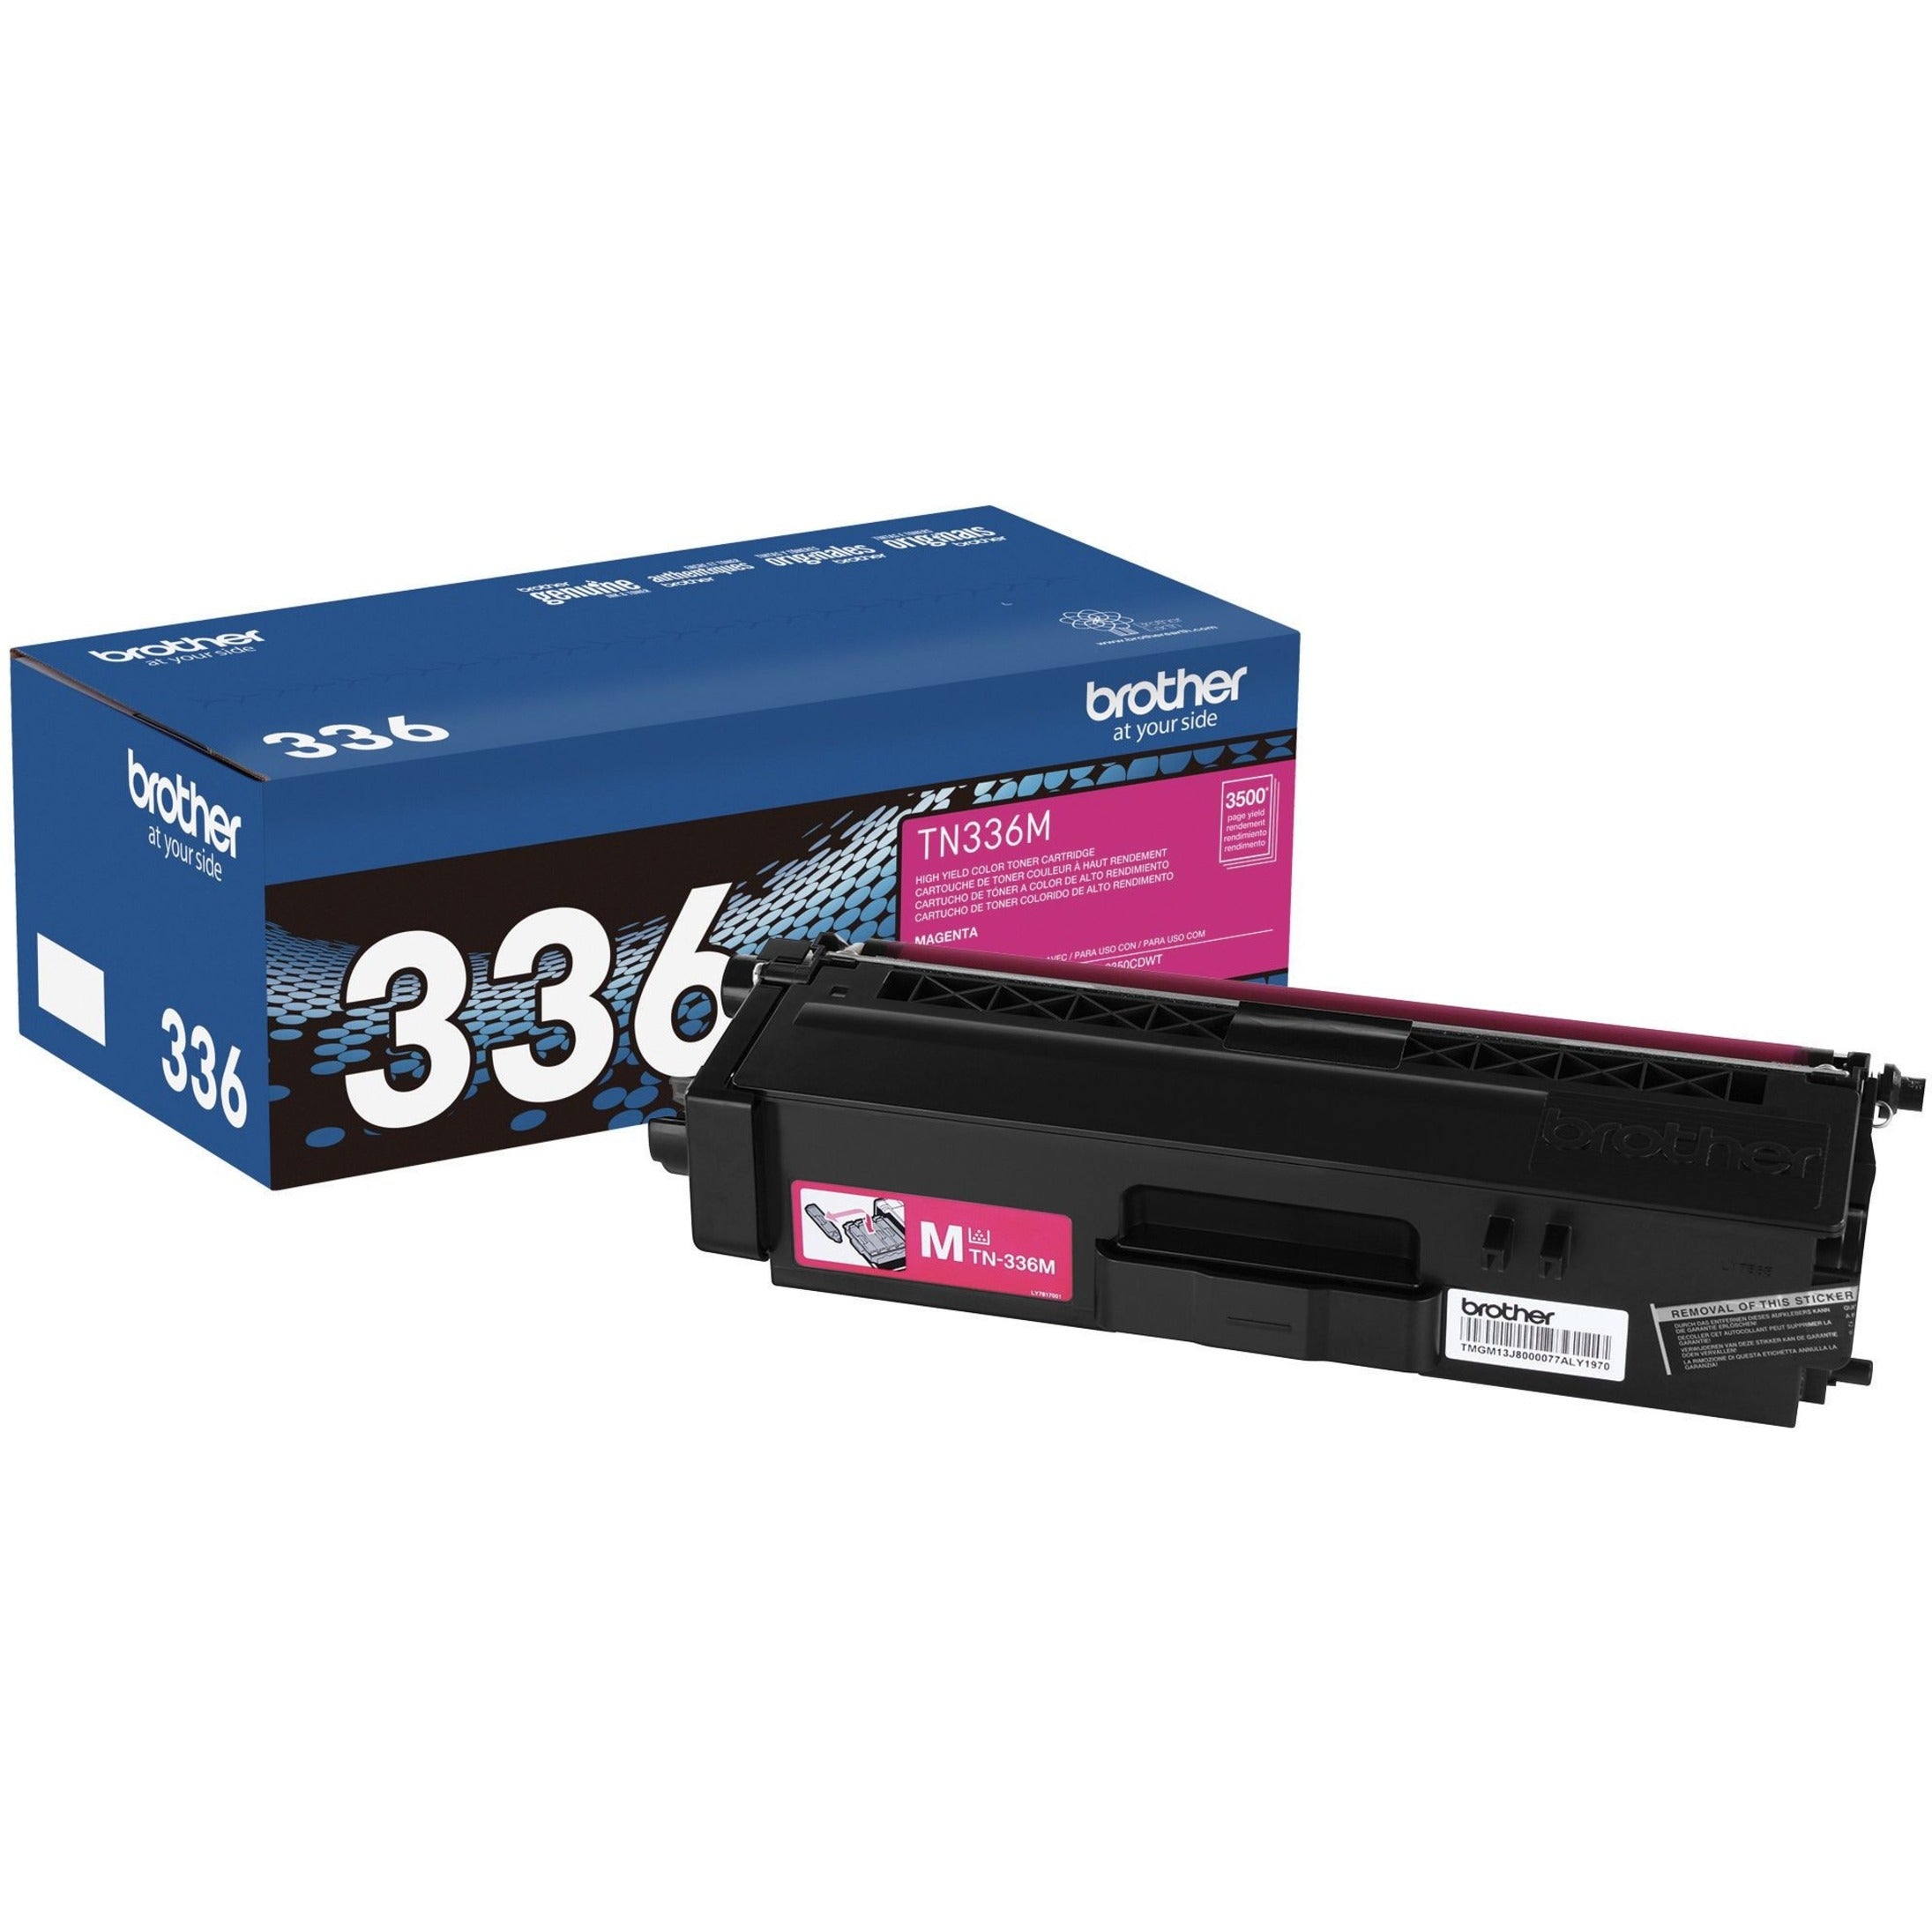 Brother TN336M High Yield Magenta Toner Cartridge, Prints up to 3500 Pages